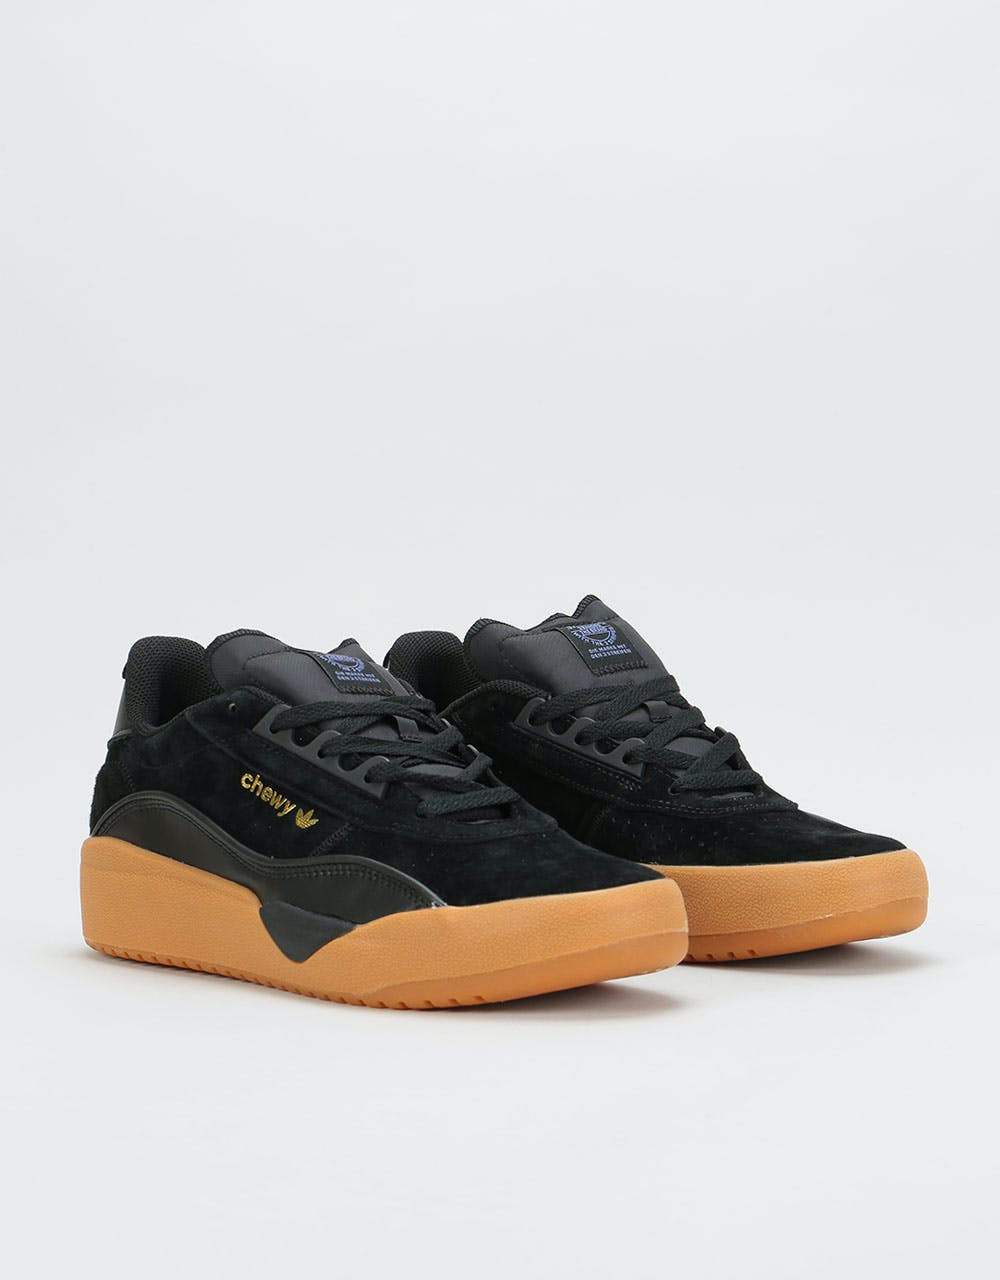 Adidas x Chewy Liberty Cup Skate Shoes - Core Black/Gold Metallic/Gum